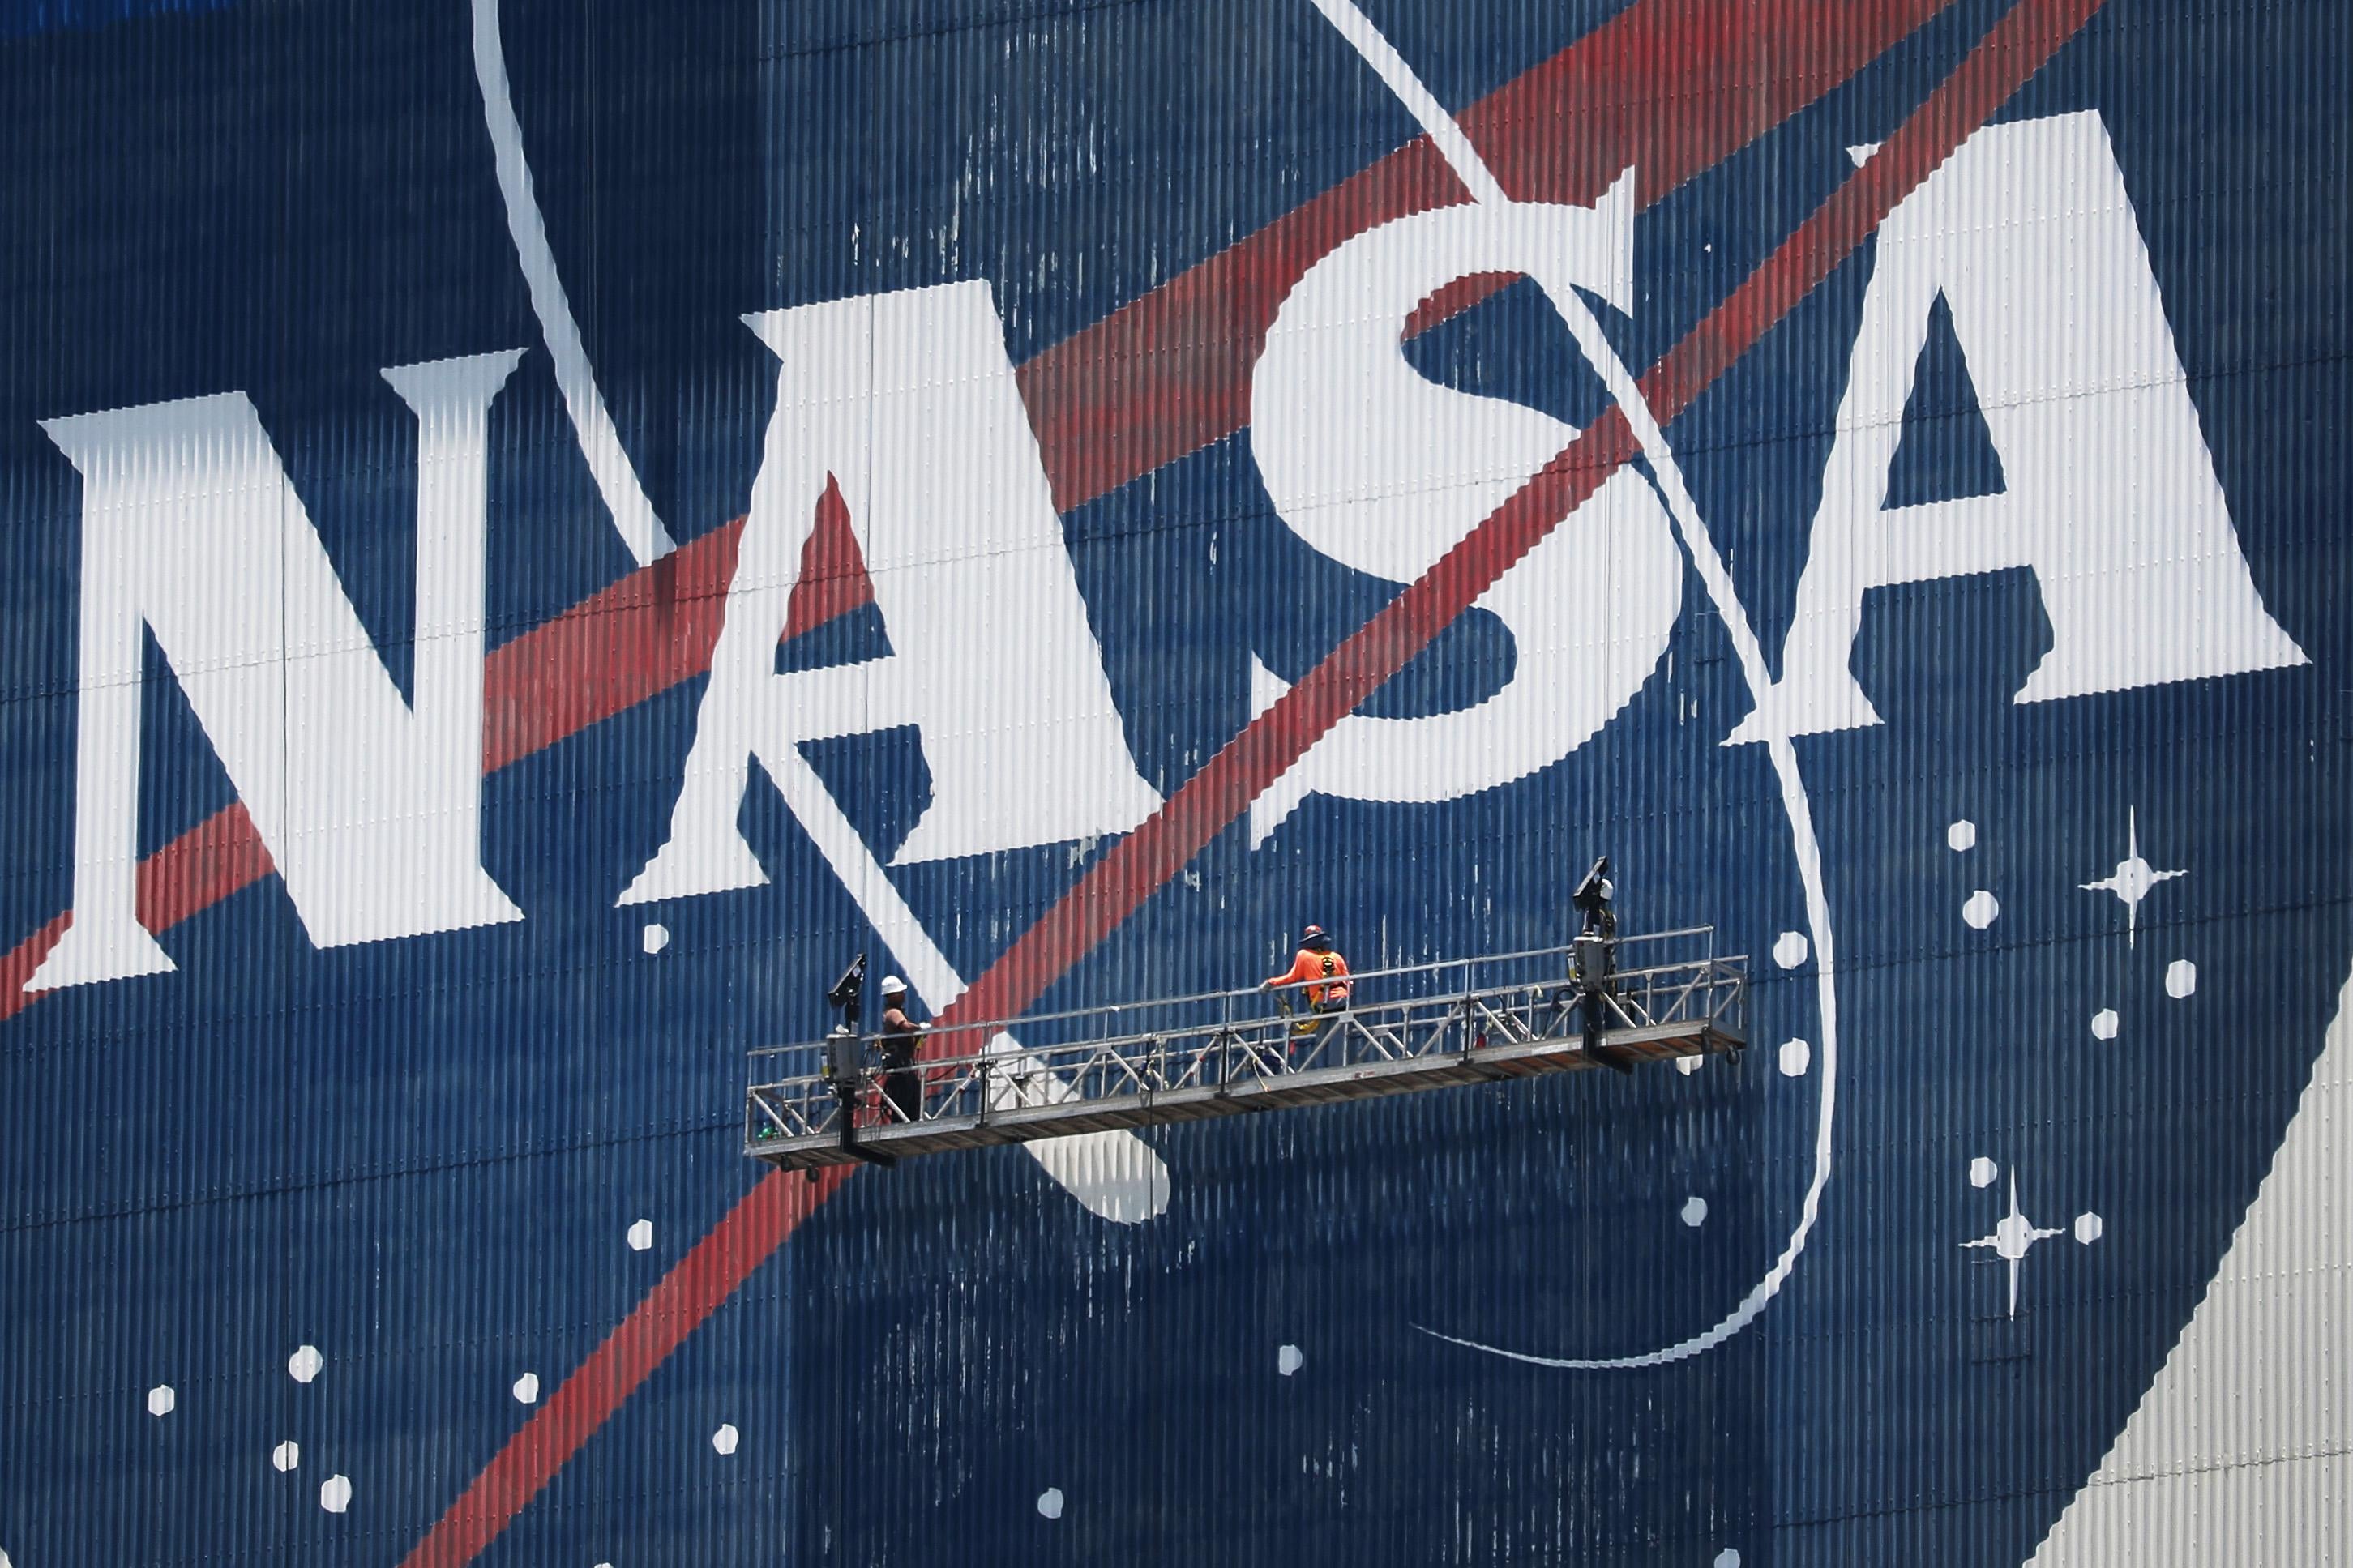 Two people on a scaffolding in front of a giant NASA logo